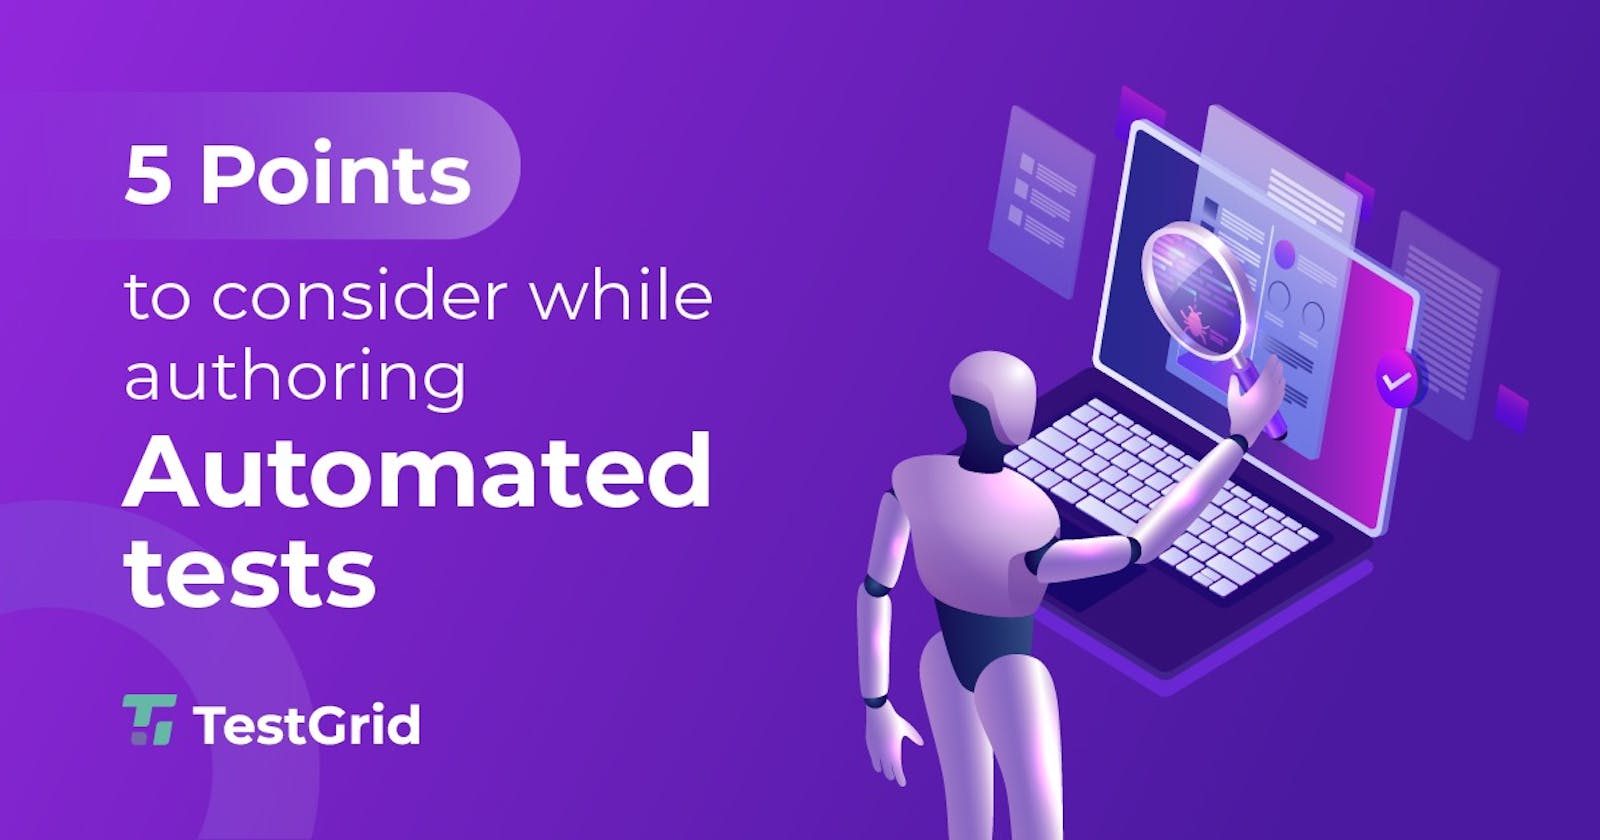 5 Points to consider while authoring automated tests